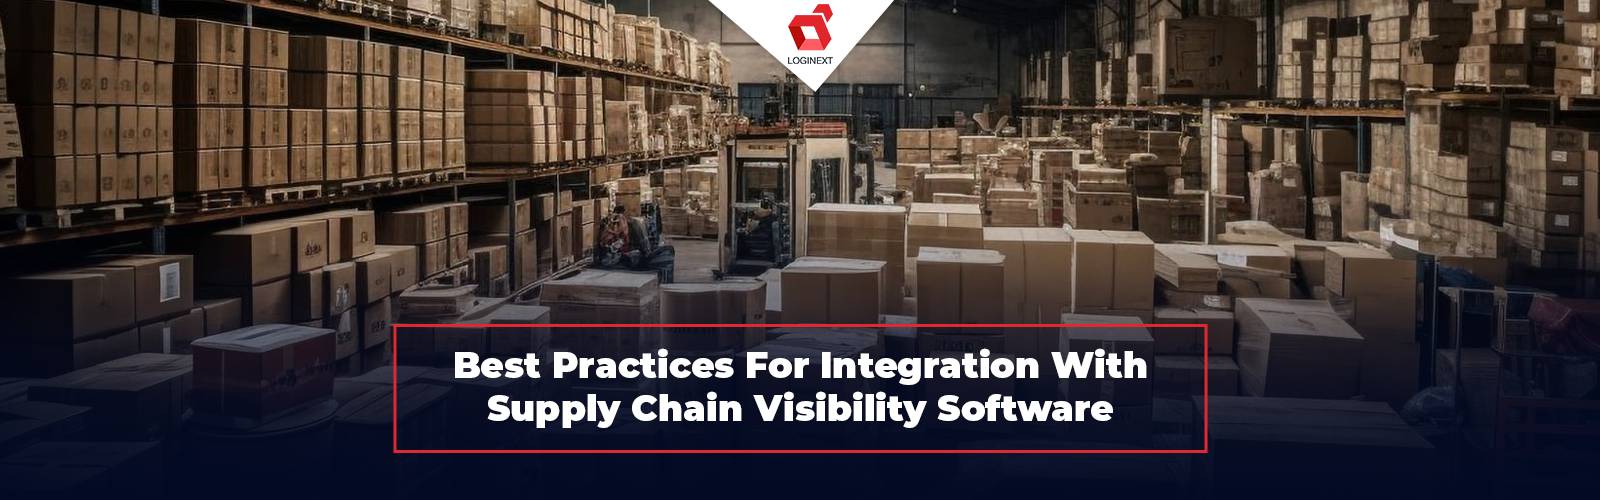 Best Practices For Onboarding Supply Chain Visibility Software